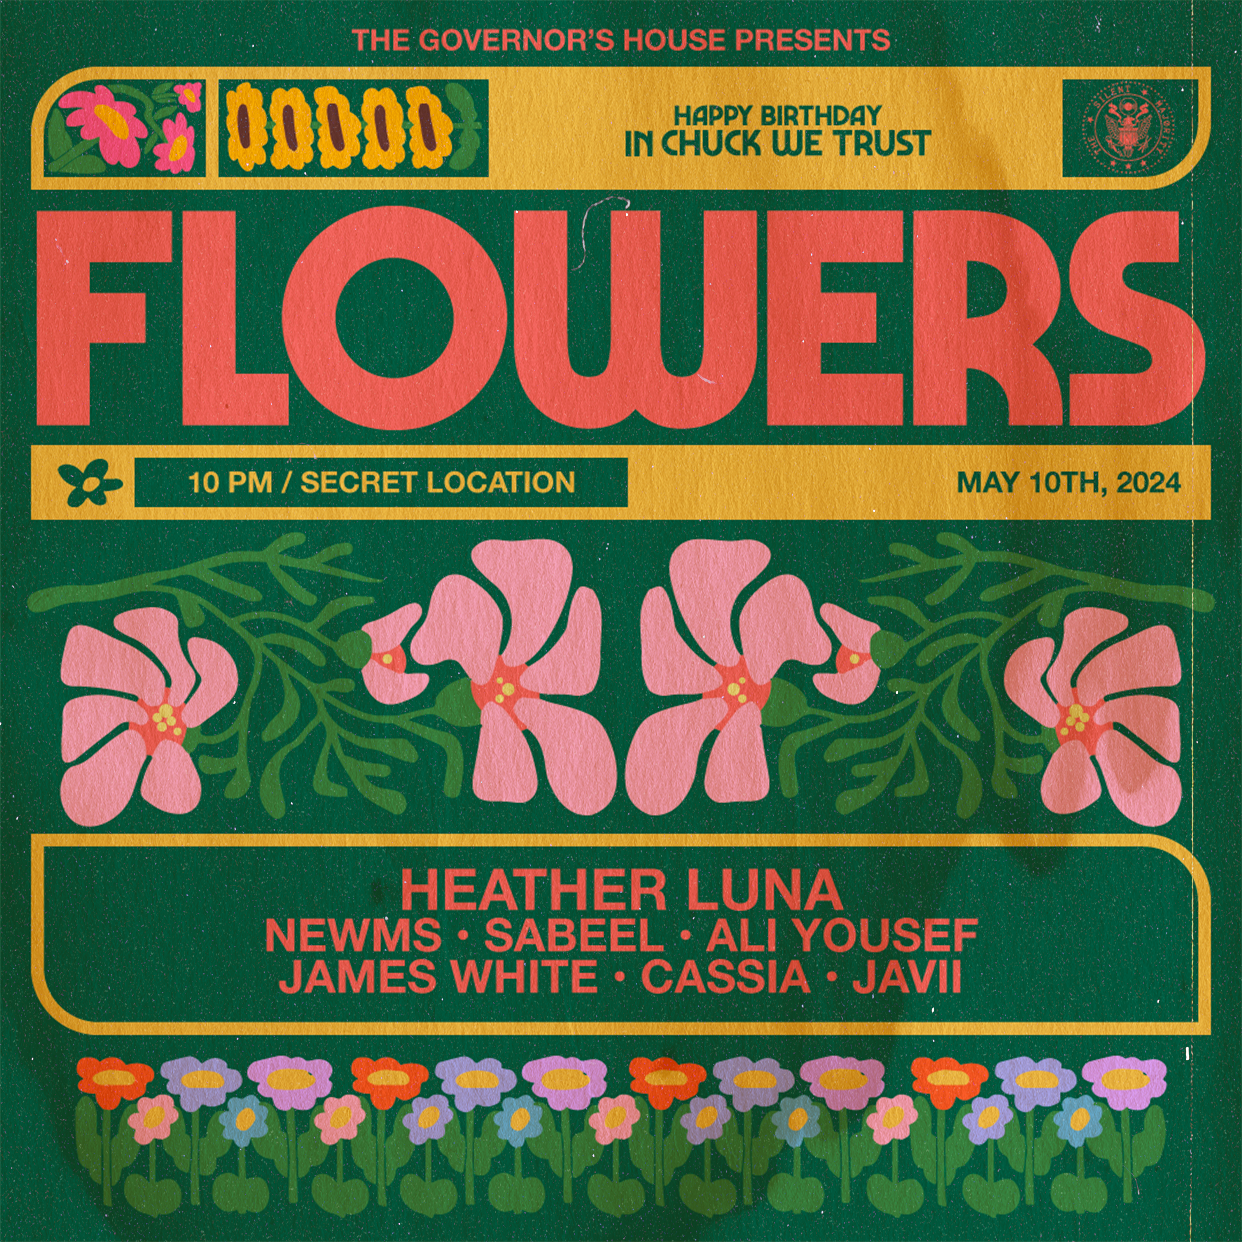 THE GOVERNOR'S HOUSE PRESENTS: FLOWERS - Página frontal